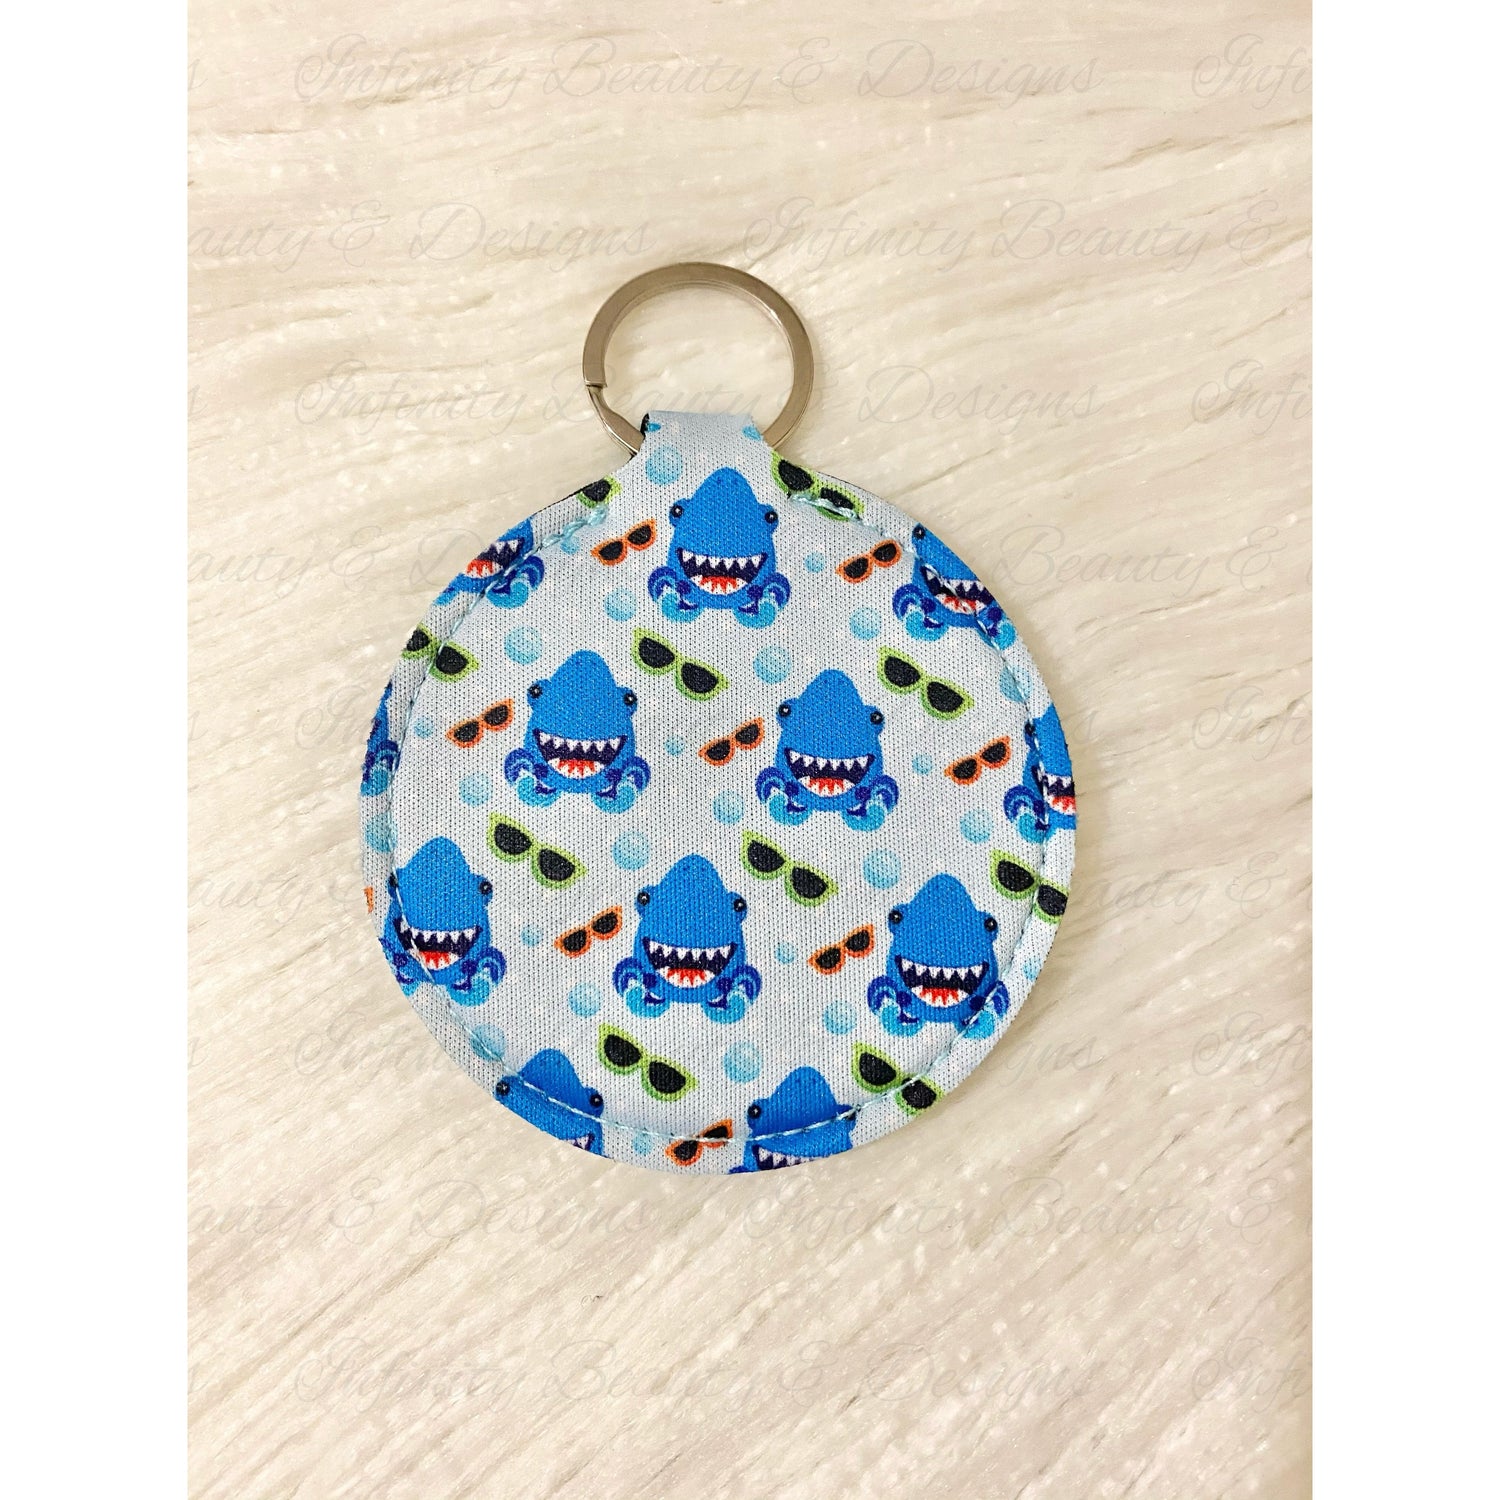 Pattern Bag Tags-Infinity Beauty & Designs